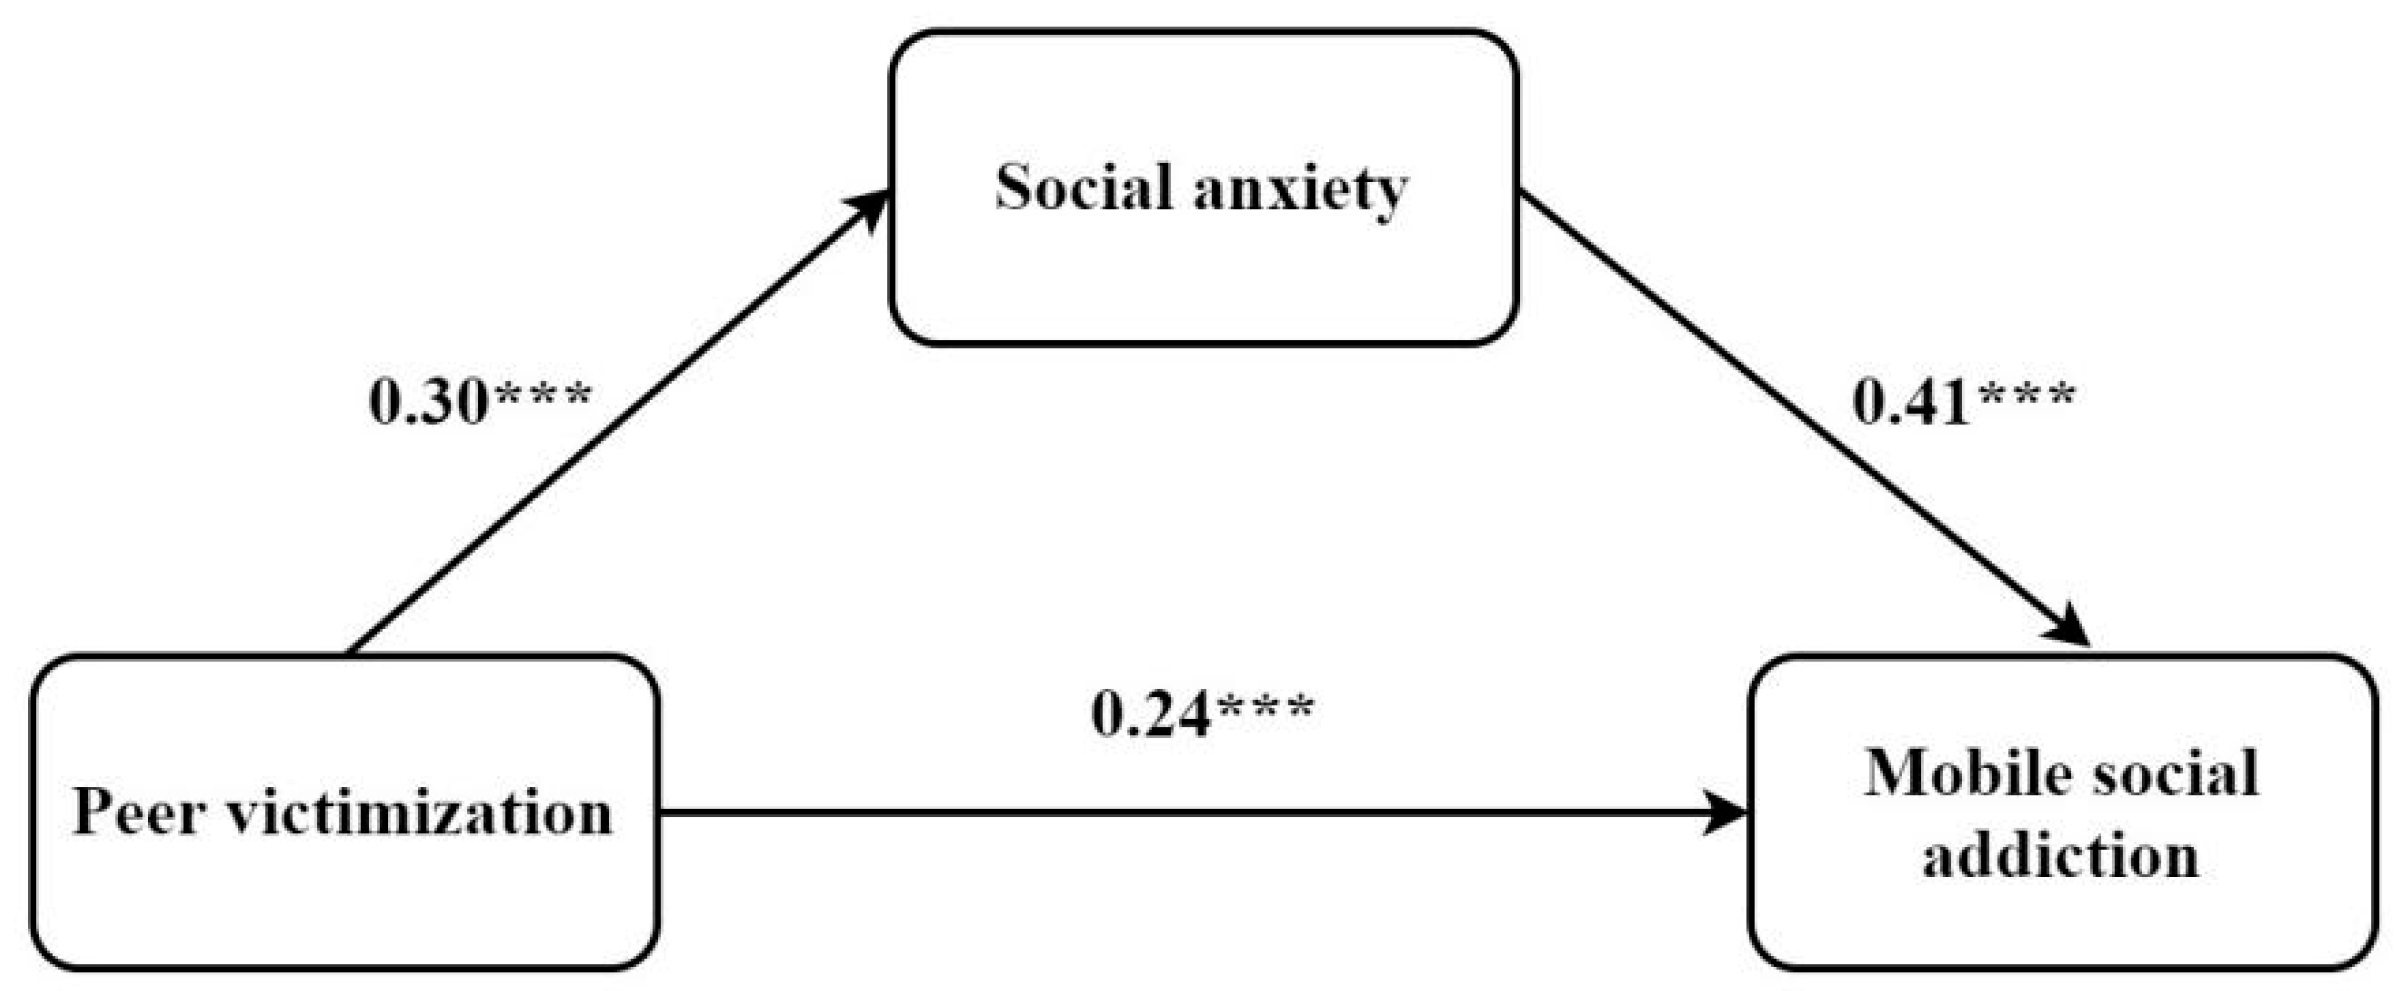 Ijerph Free Full Text Peer Victimization And Adolescent Mobile Social Addiction Mediation